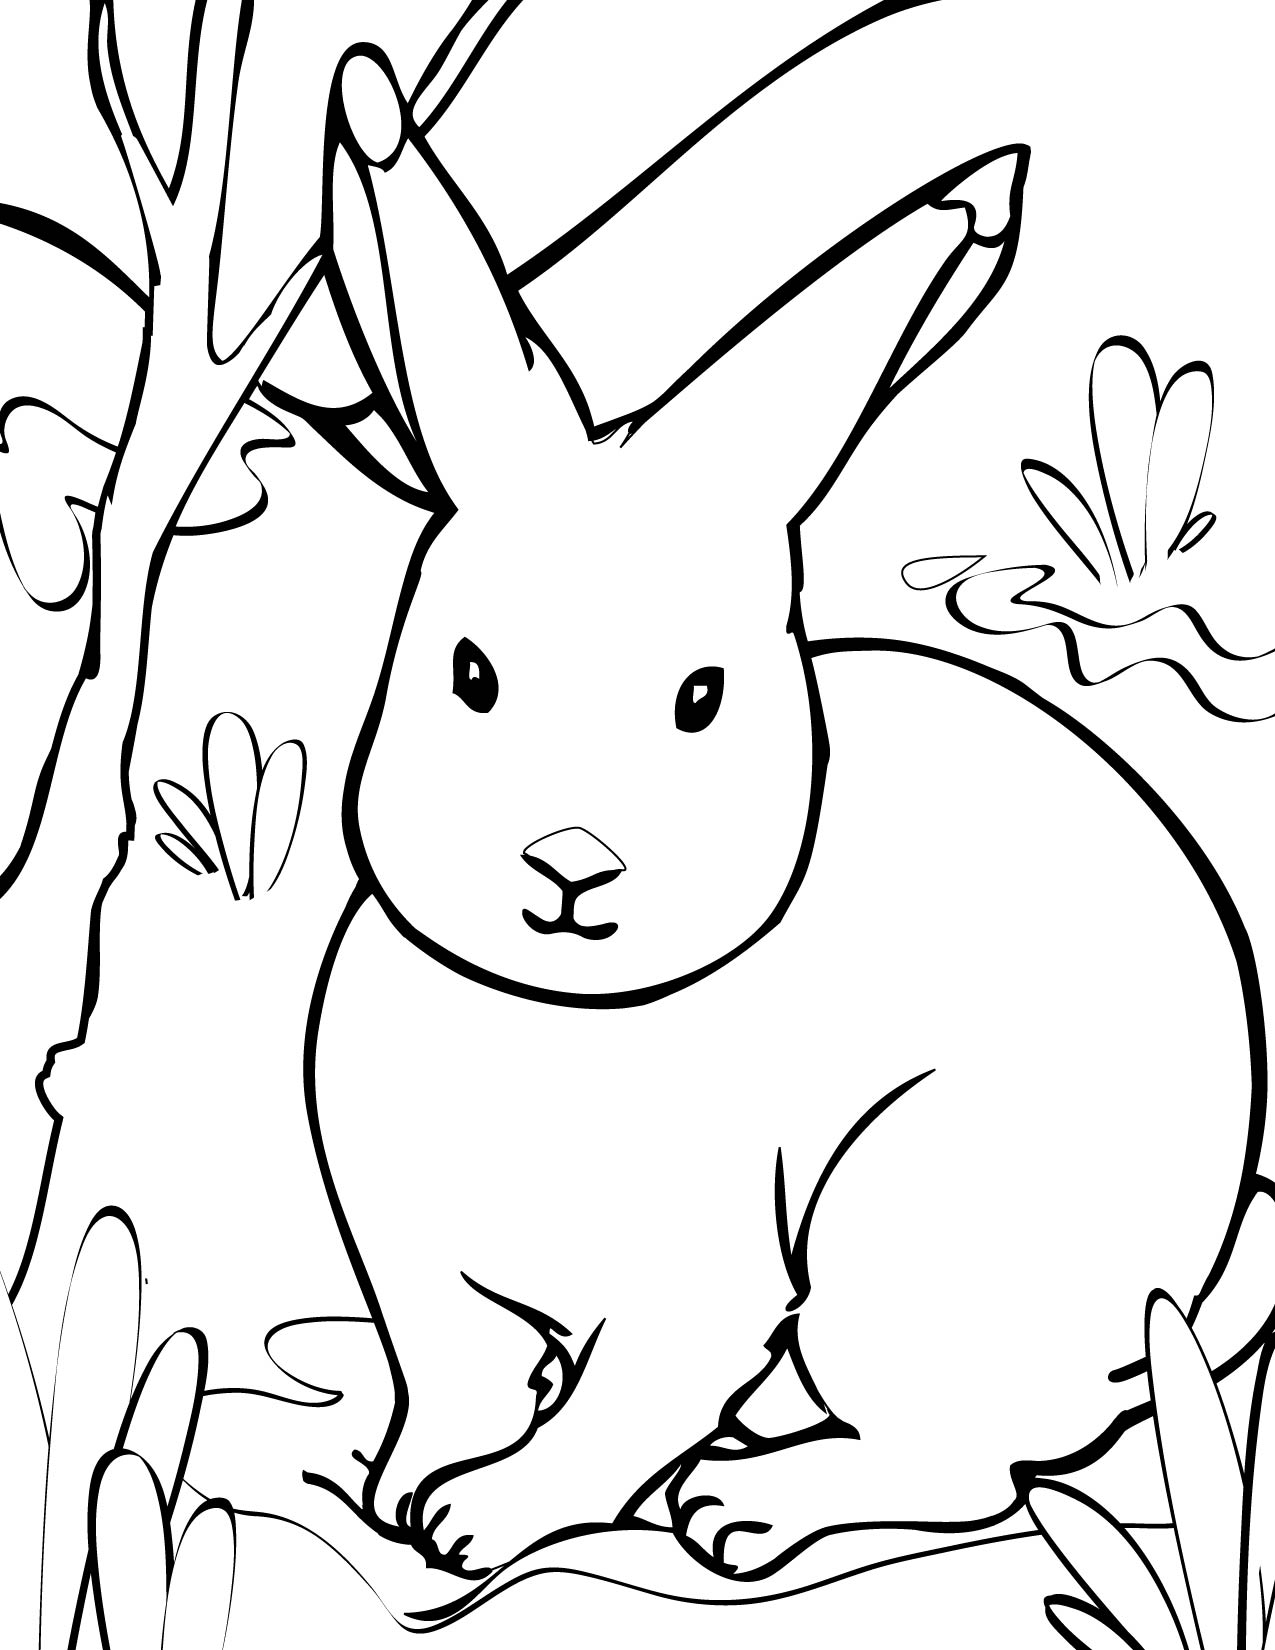 Rabbit S Printable Animals626d Coloring Page